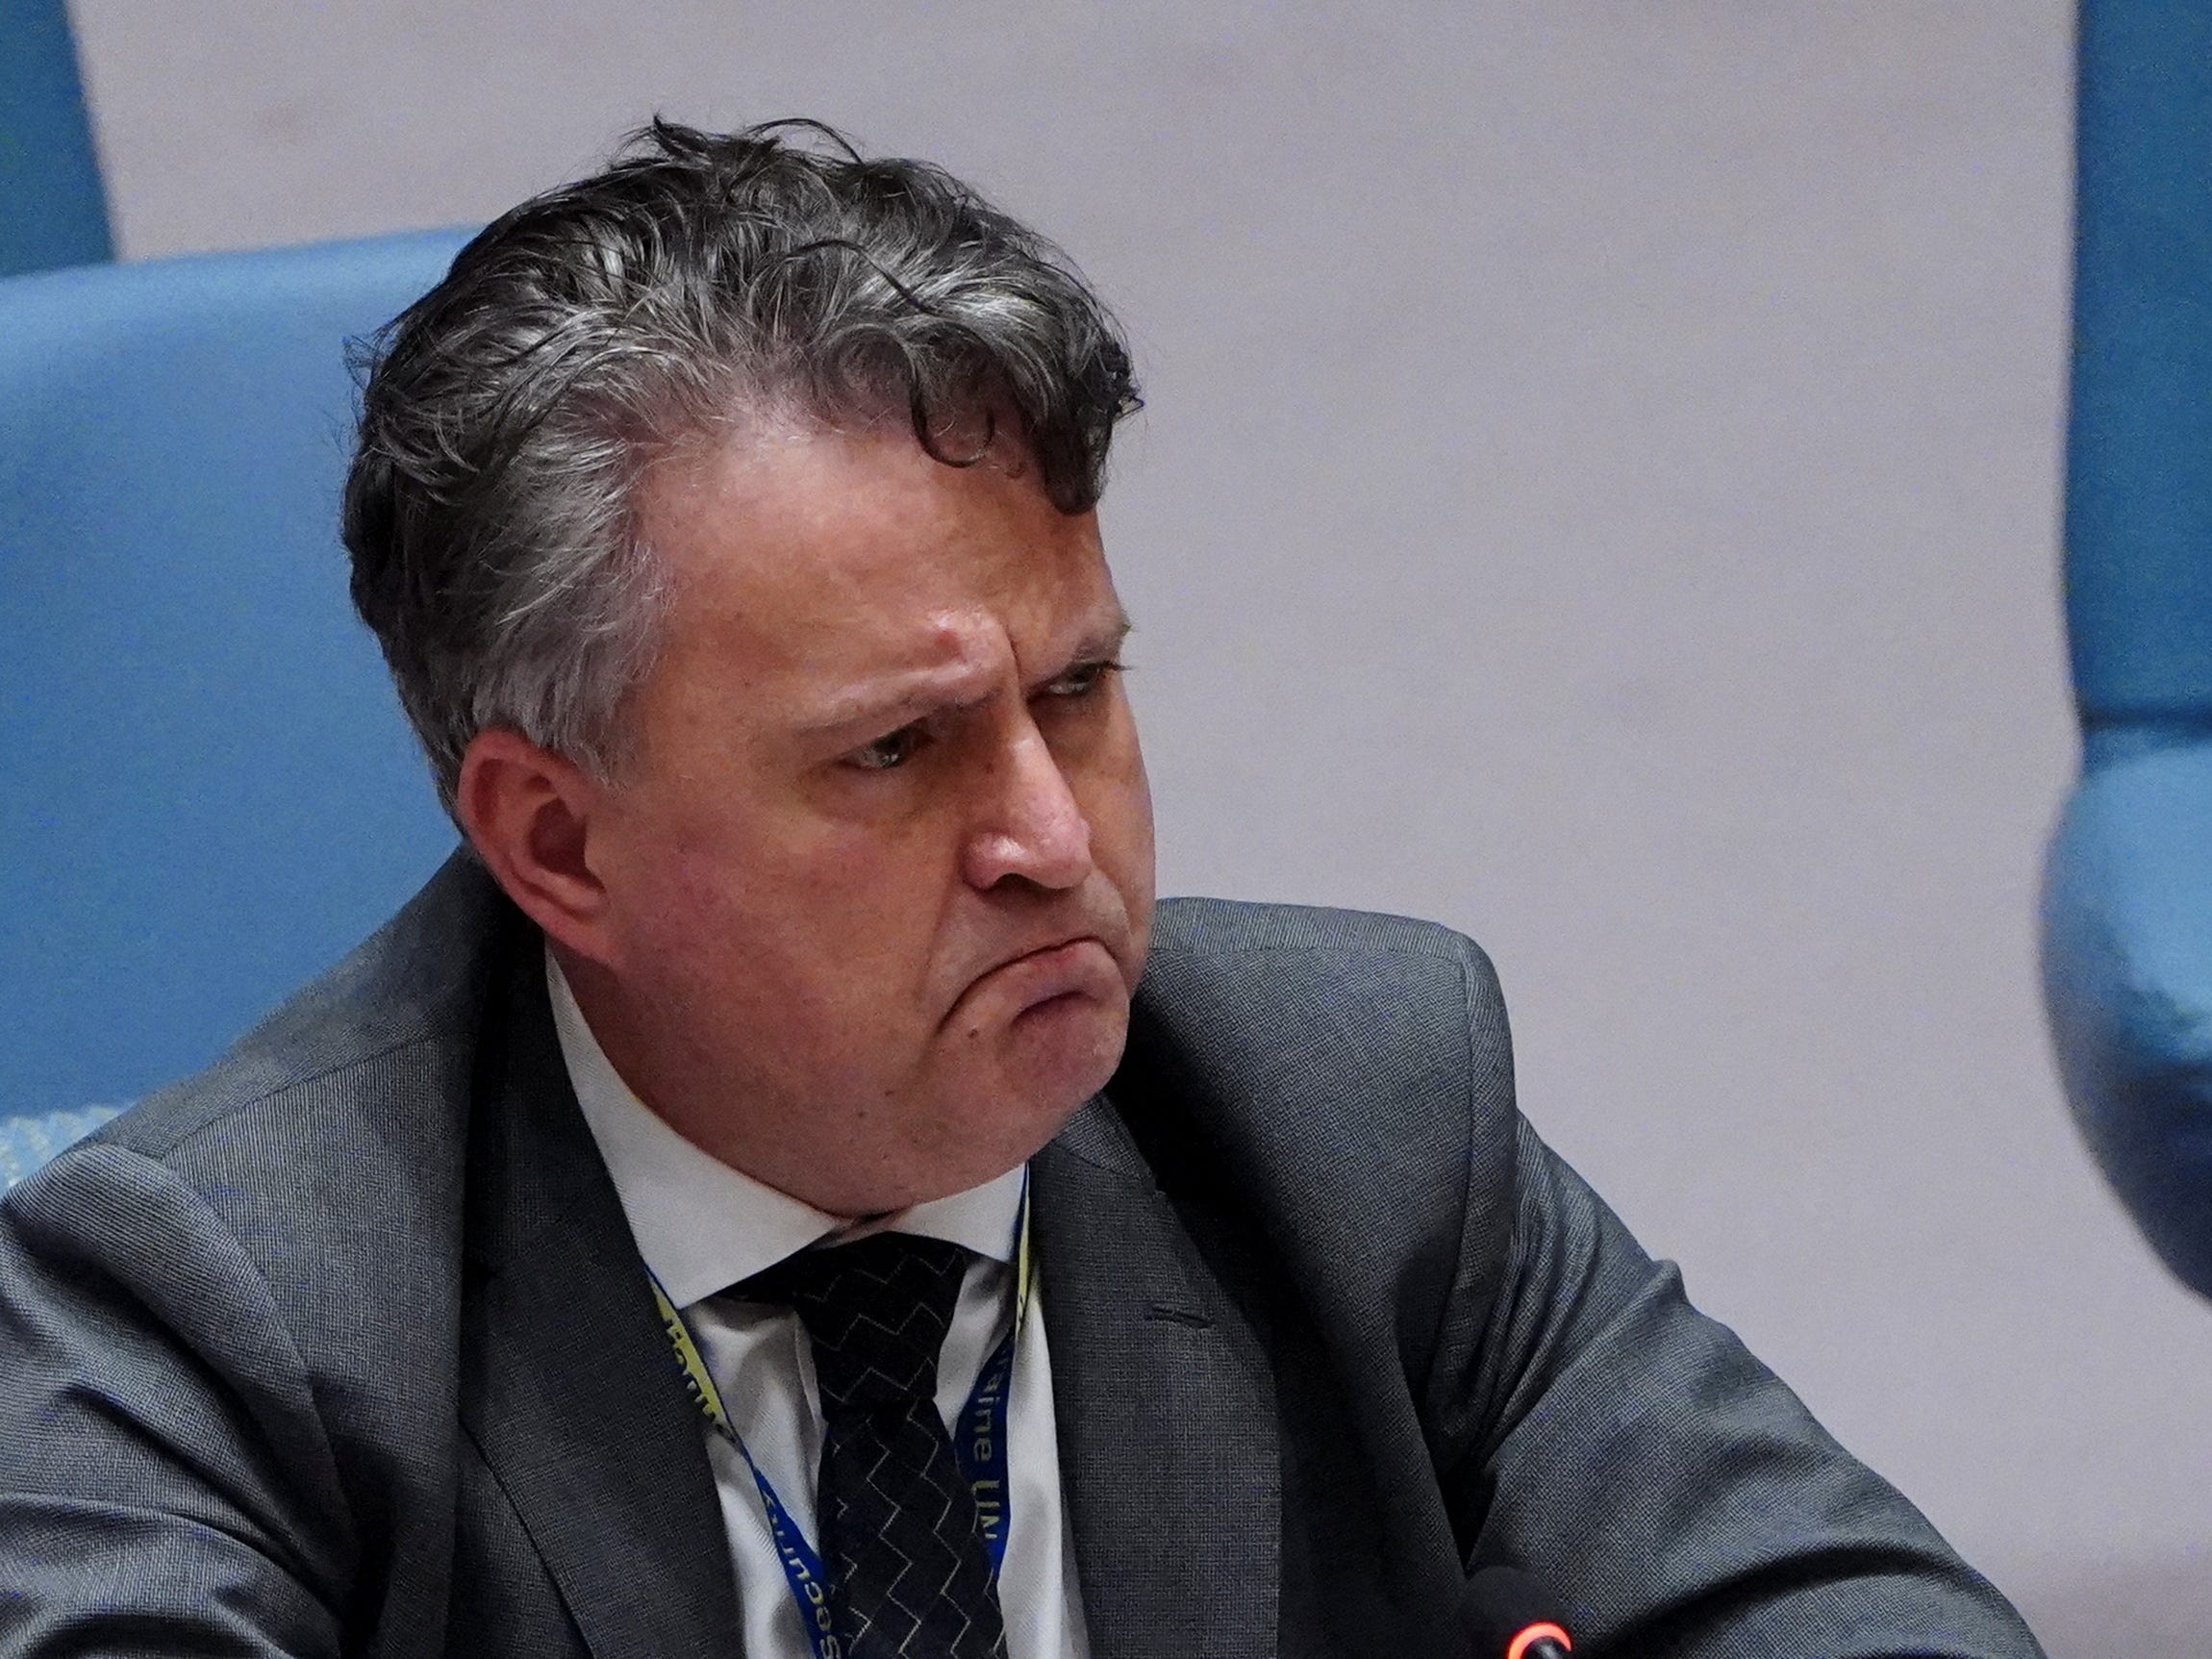 Ukrainian Ambassador to the United Nations Sergiy Kyslytsya attends the United Nations Security Council meeting to discuss the ongoing crisis in Ukraine with Russia, in New York City, U.S., February 23, 2022